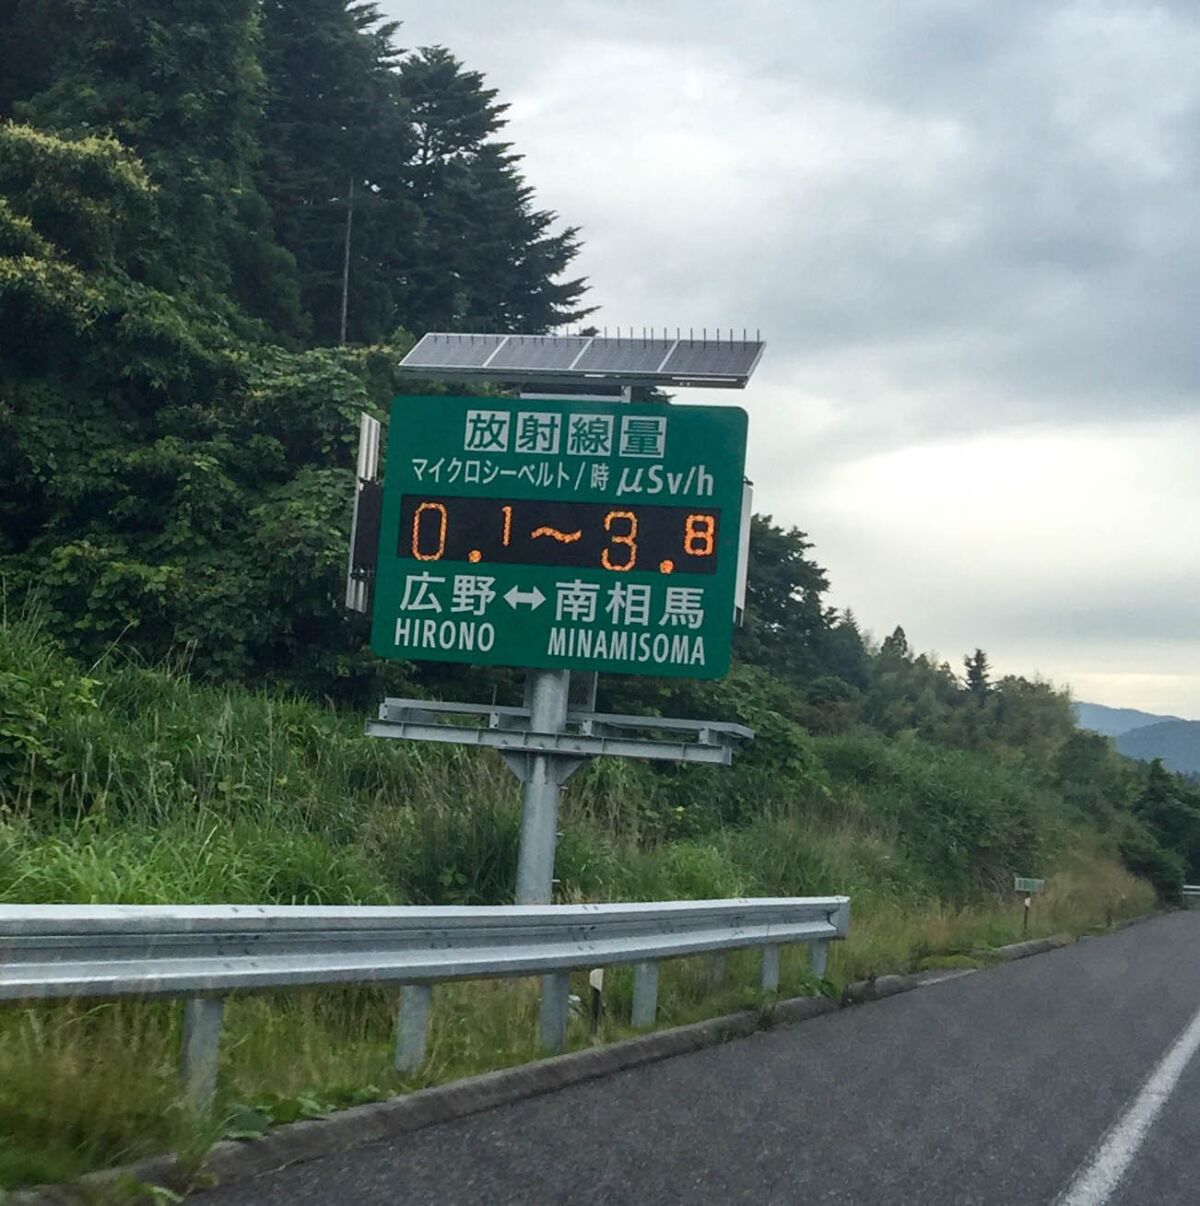 A roadside sign installed by the Japanese government south of the Fukushima Daiichi nuclear plant displays radiation readings.